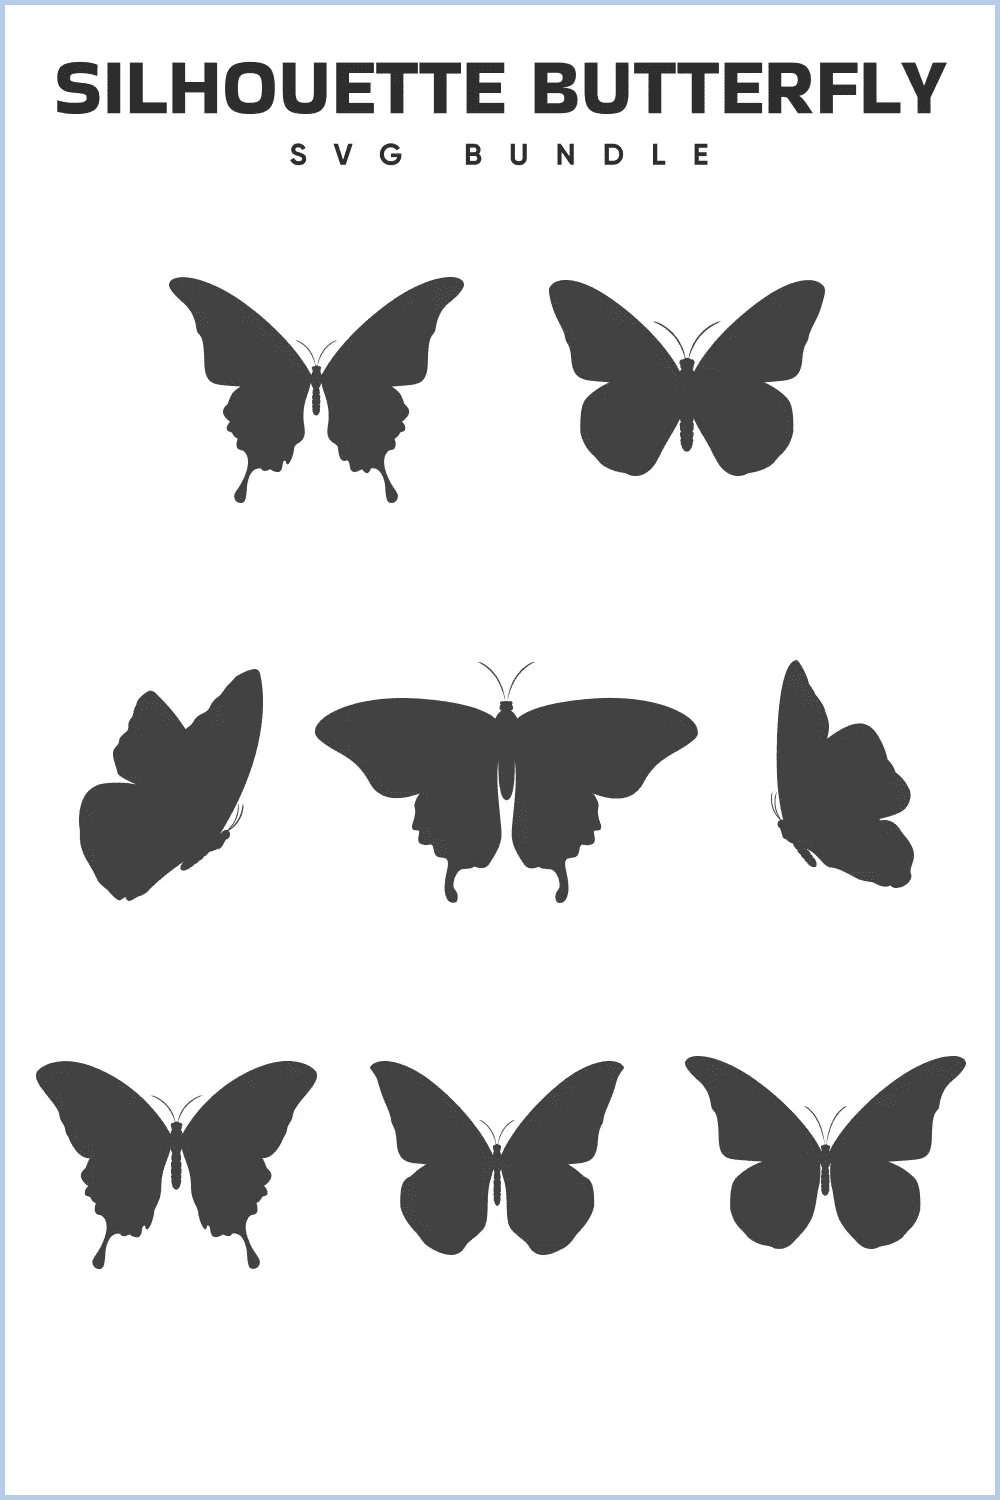 Collage of 8 black silhouette of butterflies.